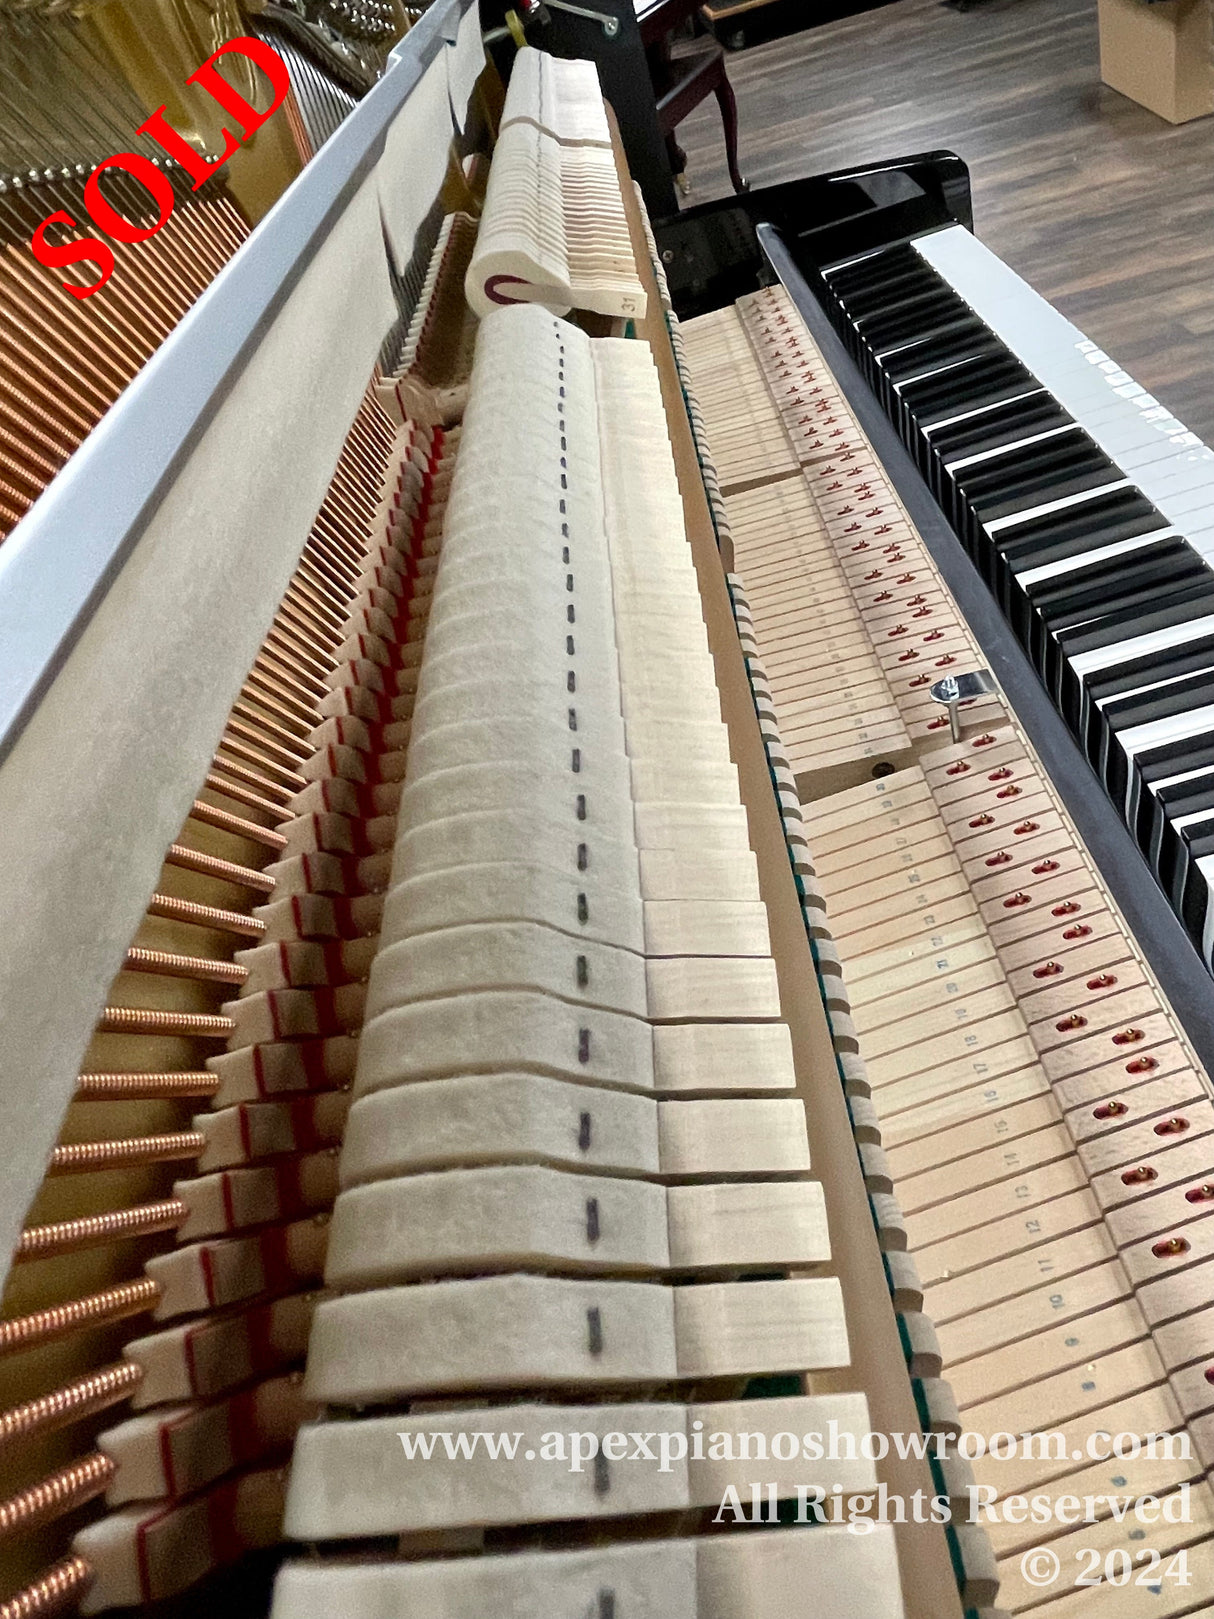 Interior view of a grand piano showing the hammers and strings, with focus on the dampers and the keyboard, located in a showroom.